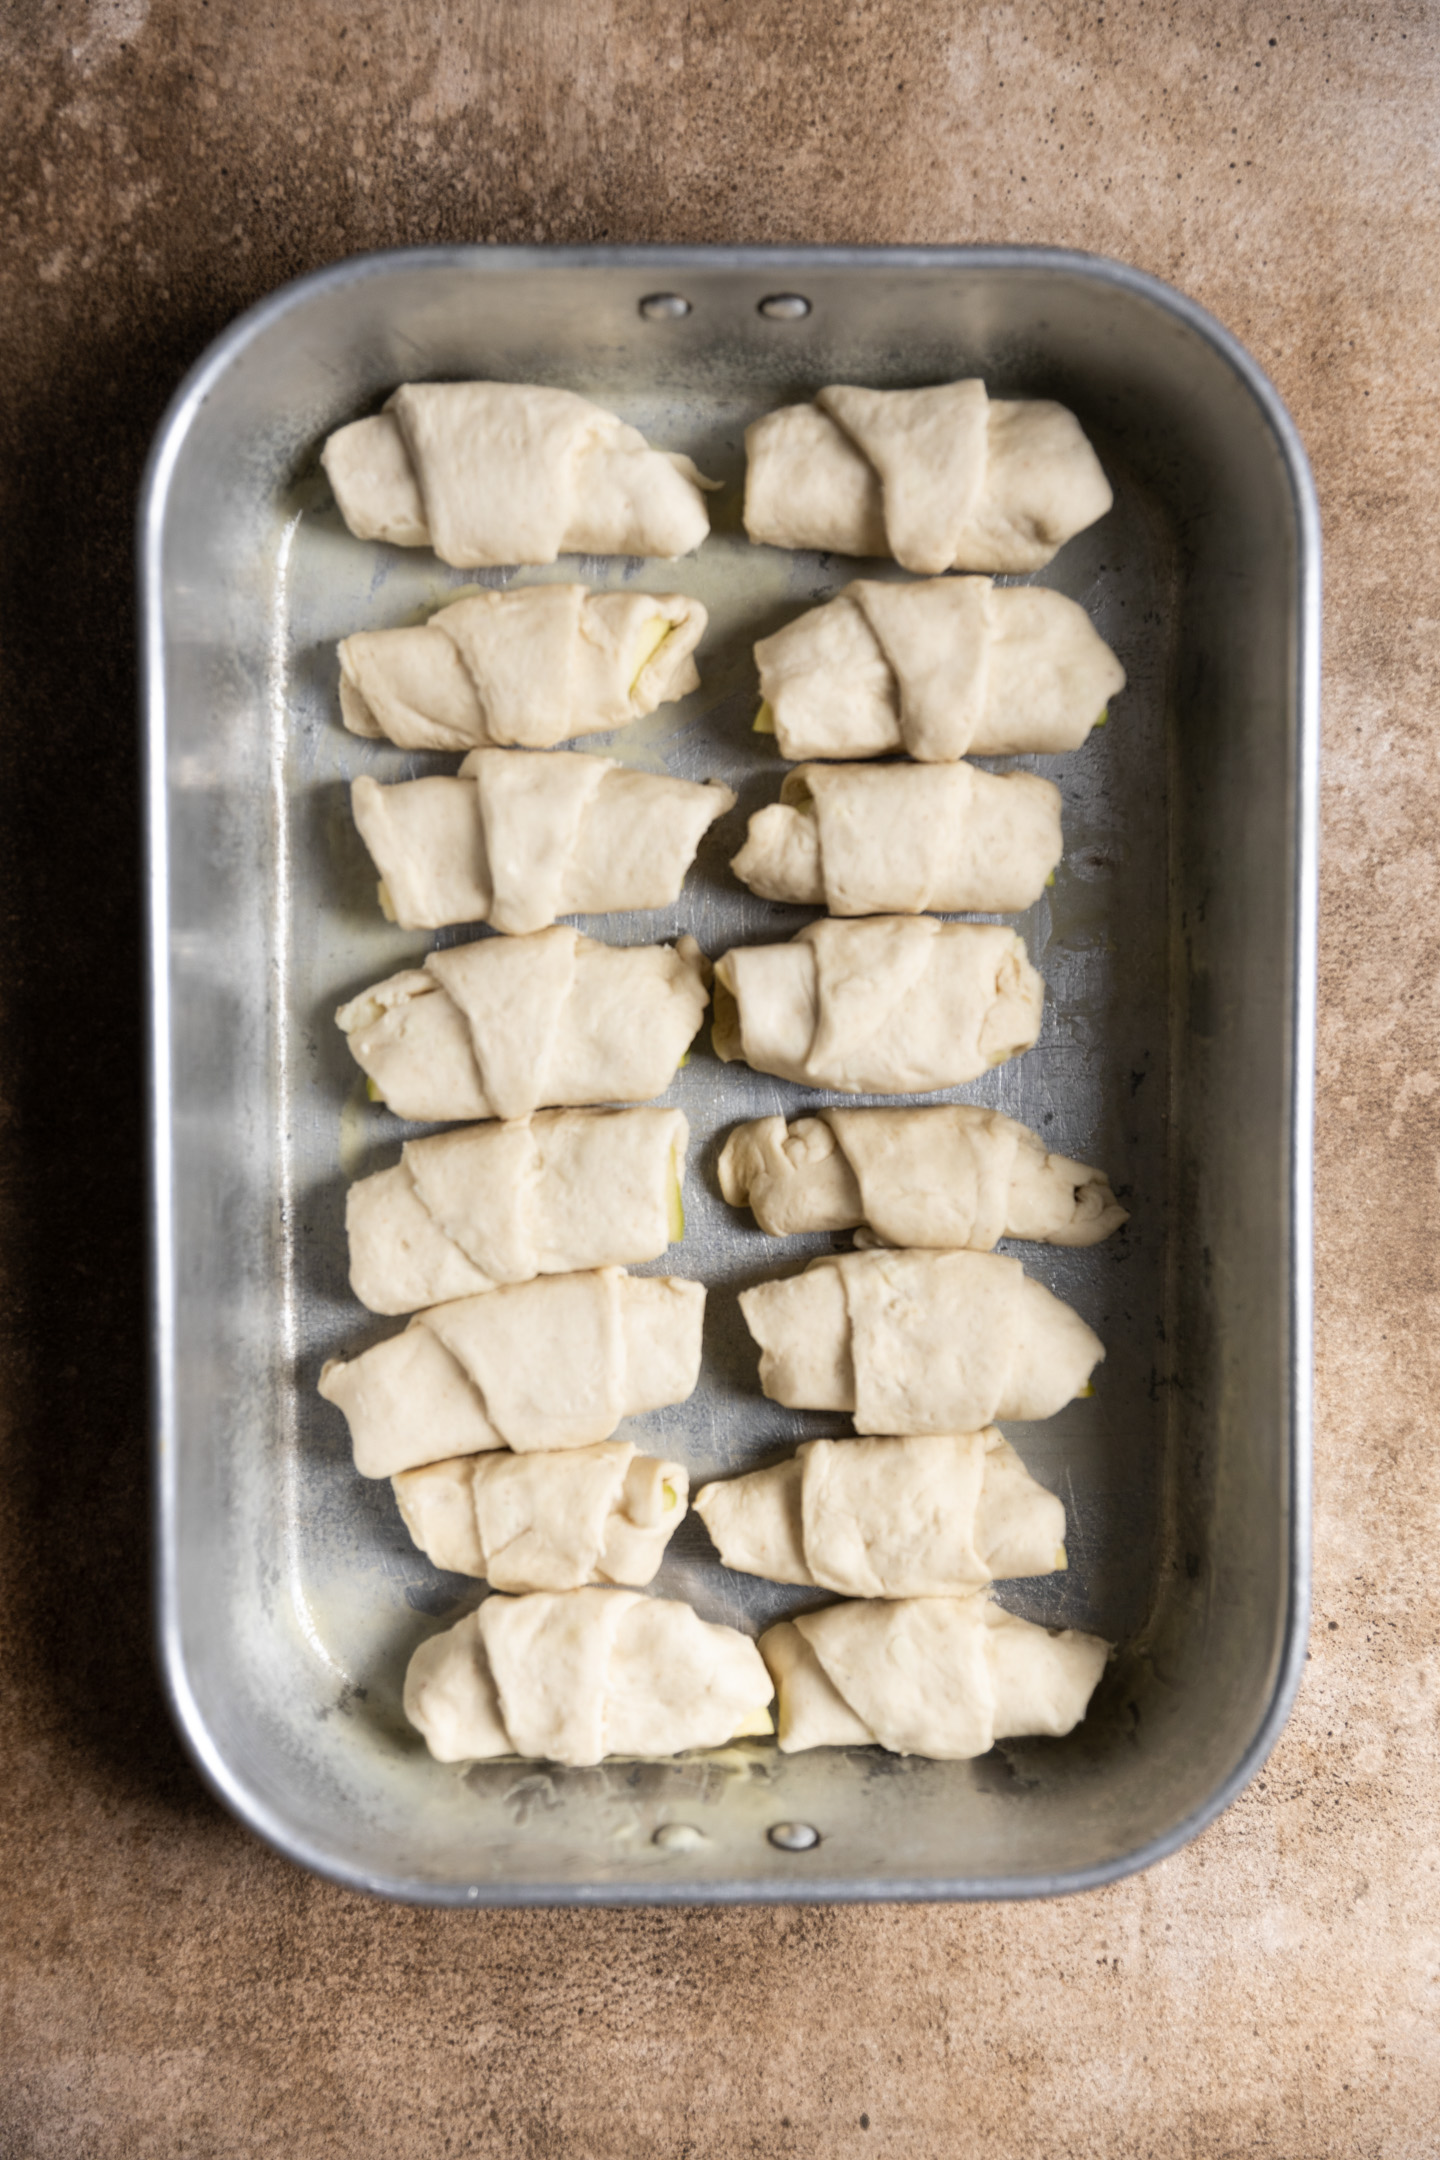 Unbaked and wrapped dumplings in a baking pan.